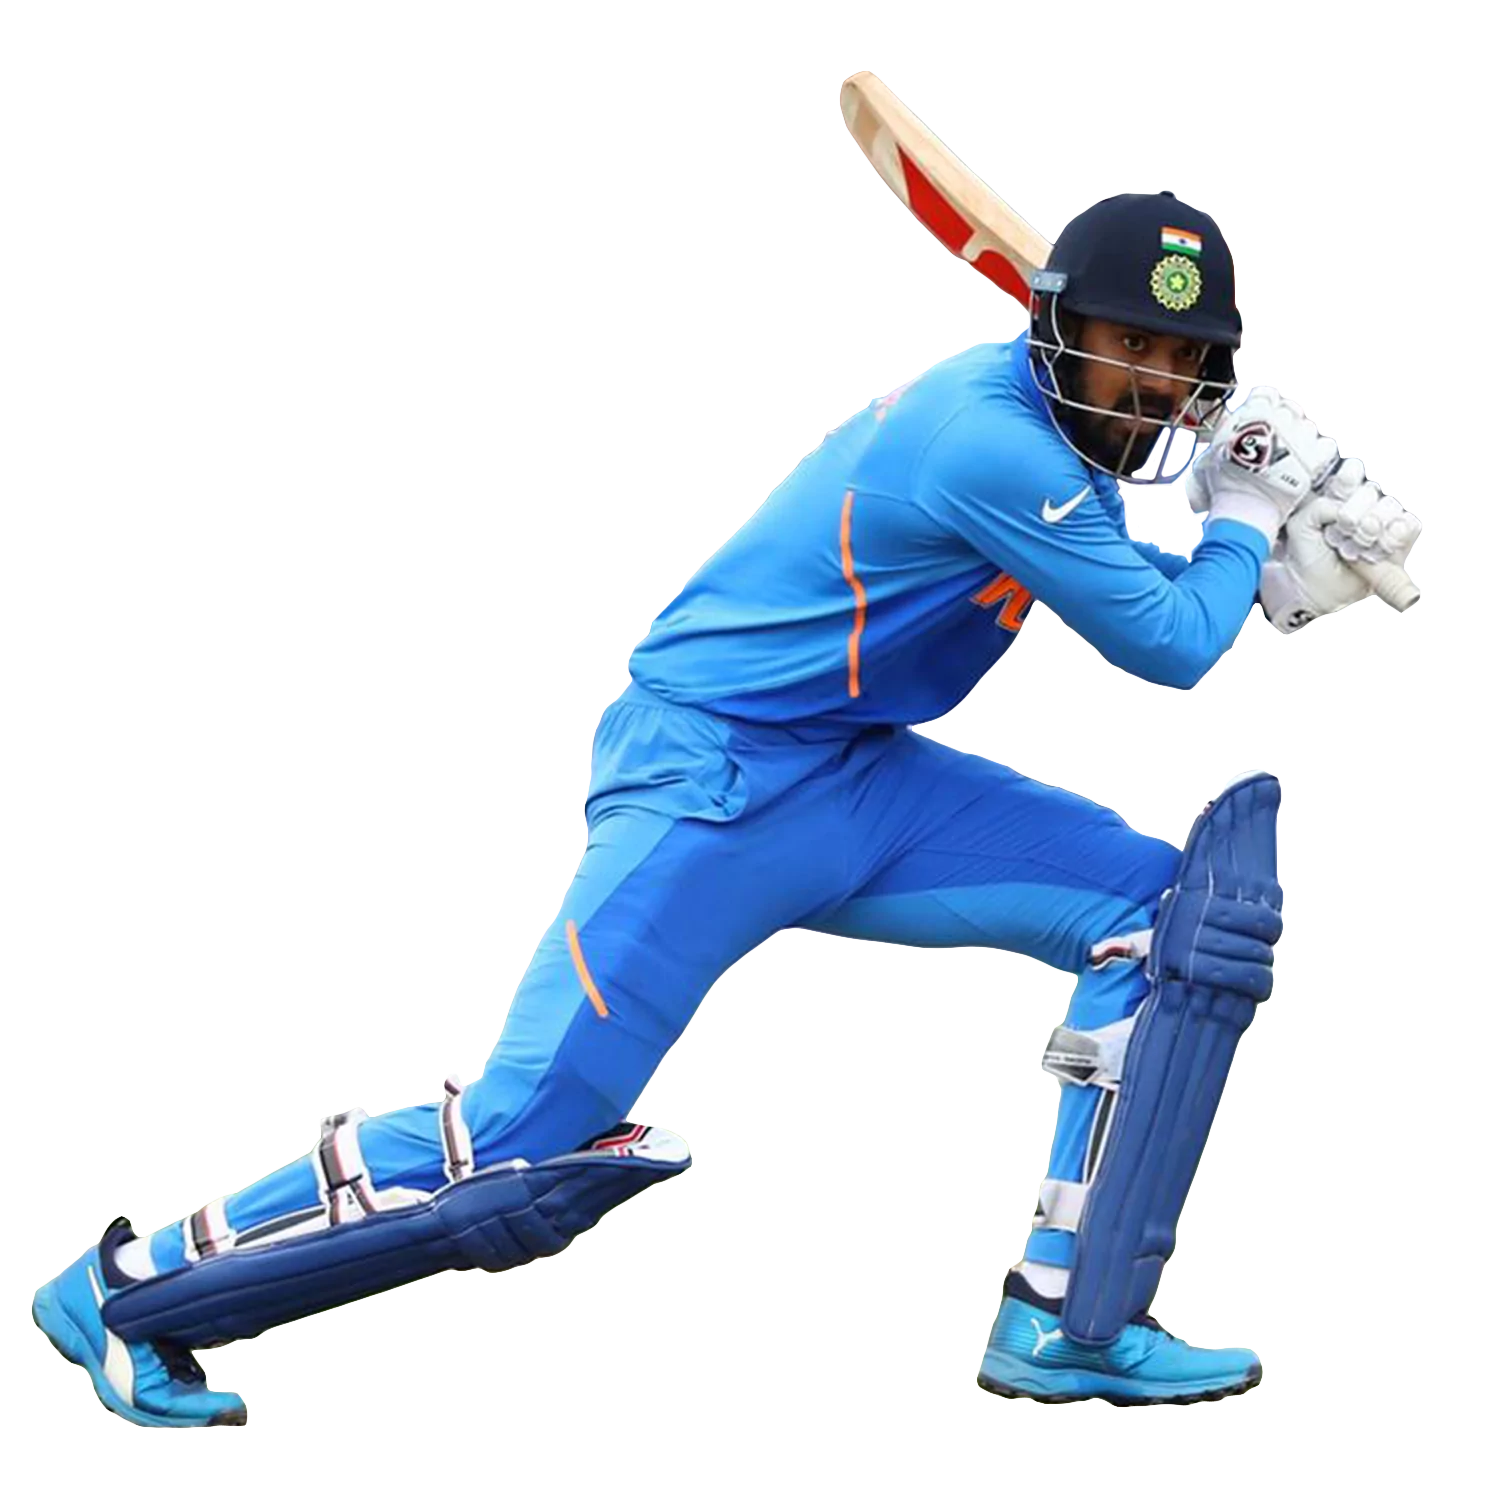 The best and reliable information about online cricket betting in India: legality and security of online cricket betting services, use of Indian rupee currency, online betting on various championships and other important information.